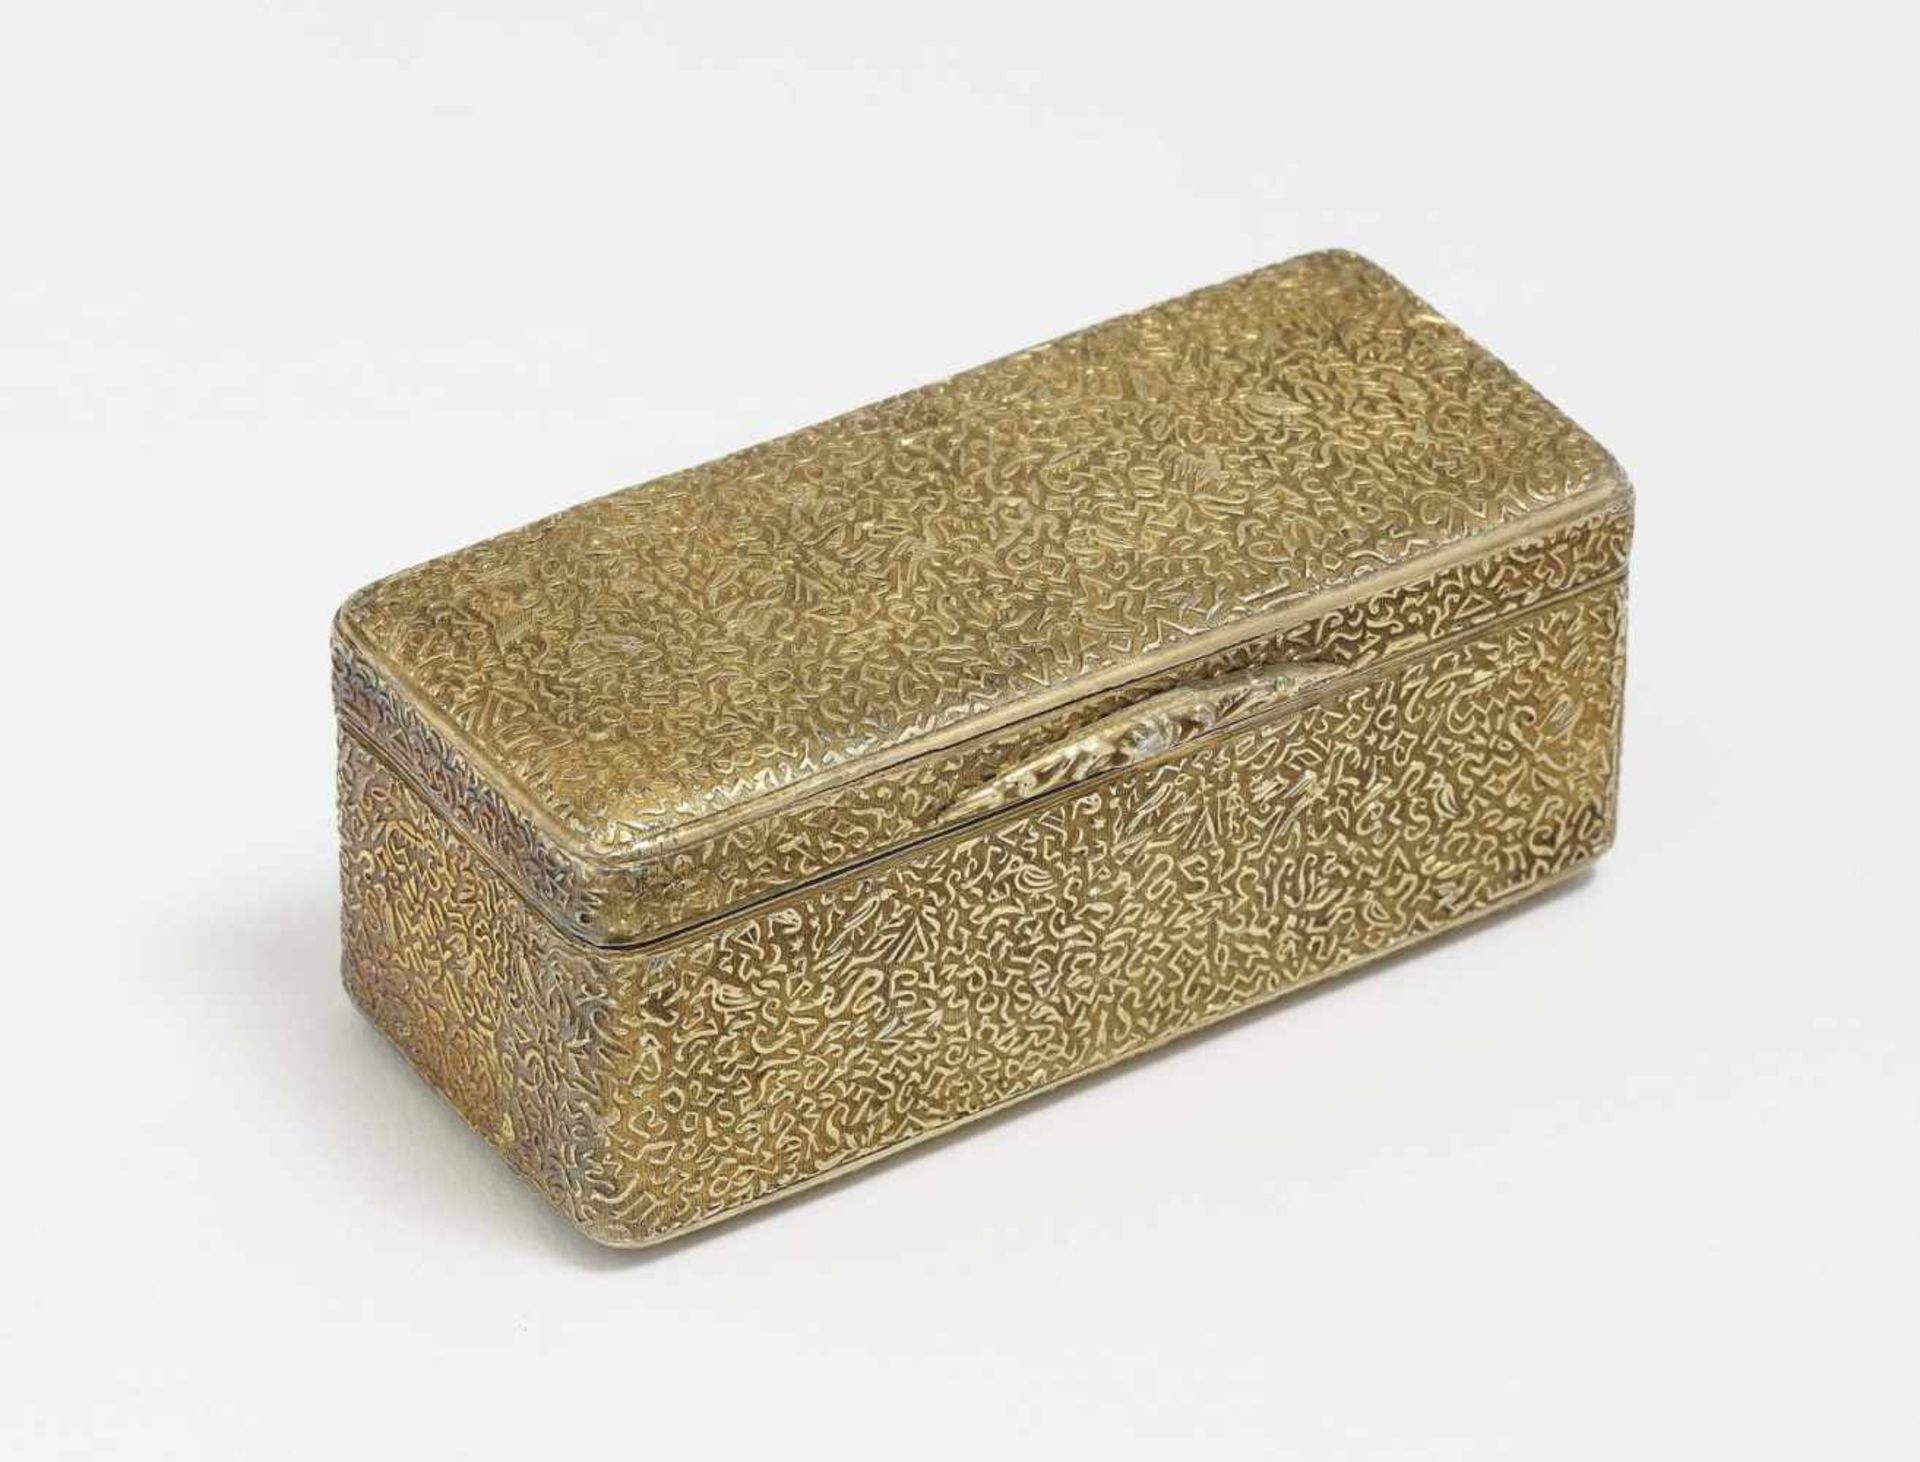 A Snuff BoxMoscow, 2nd quarter of the 19th entury, master E. E. Silver, gold-plated. Hallmarked (